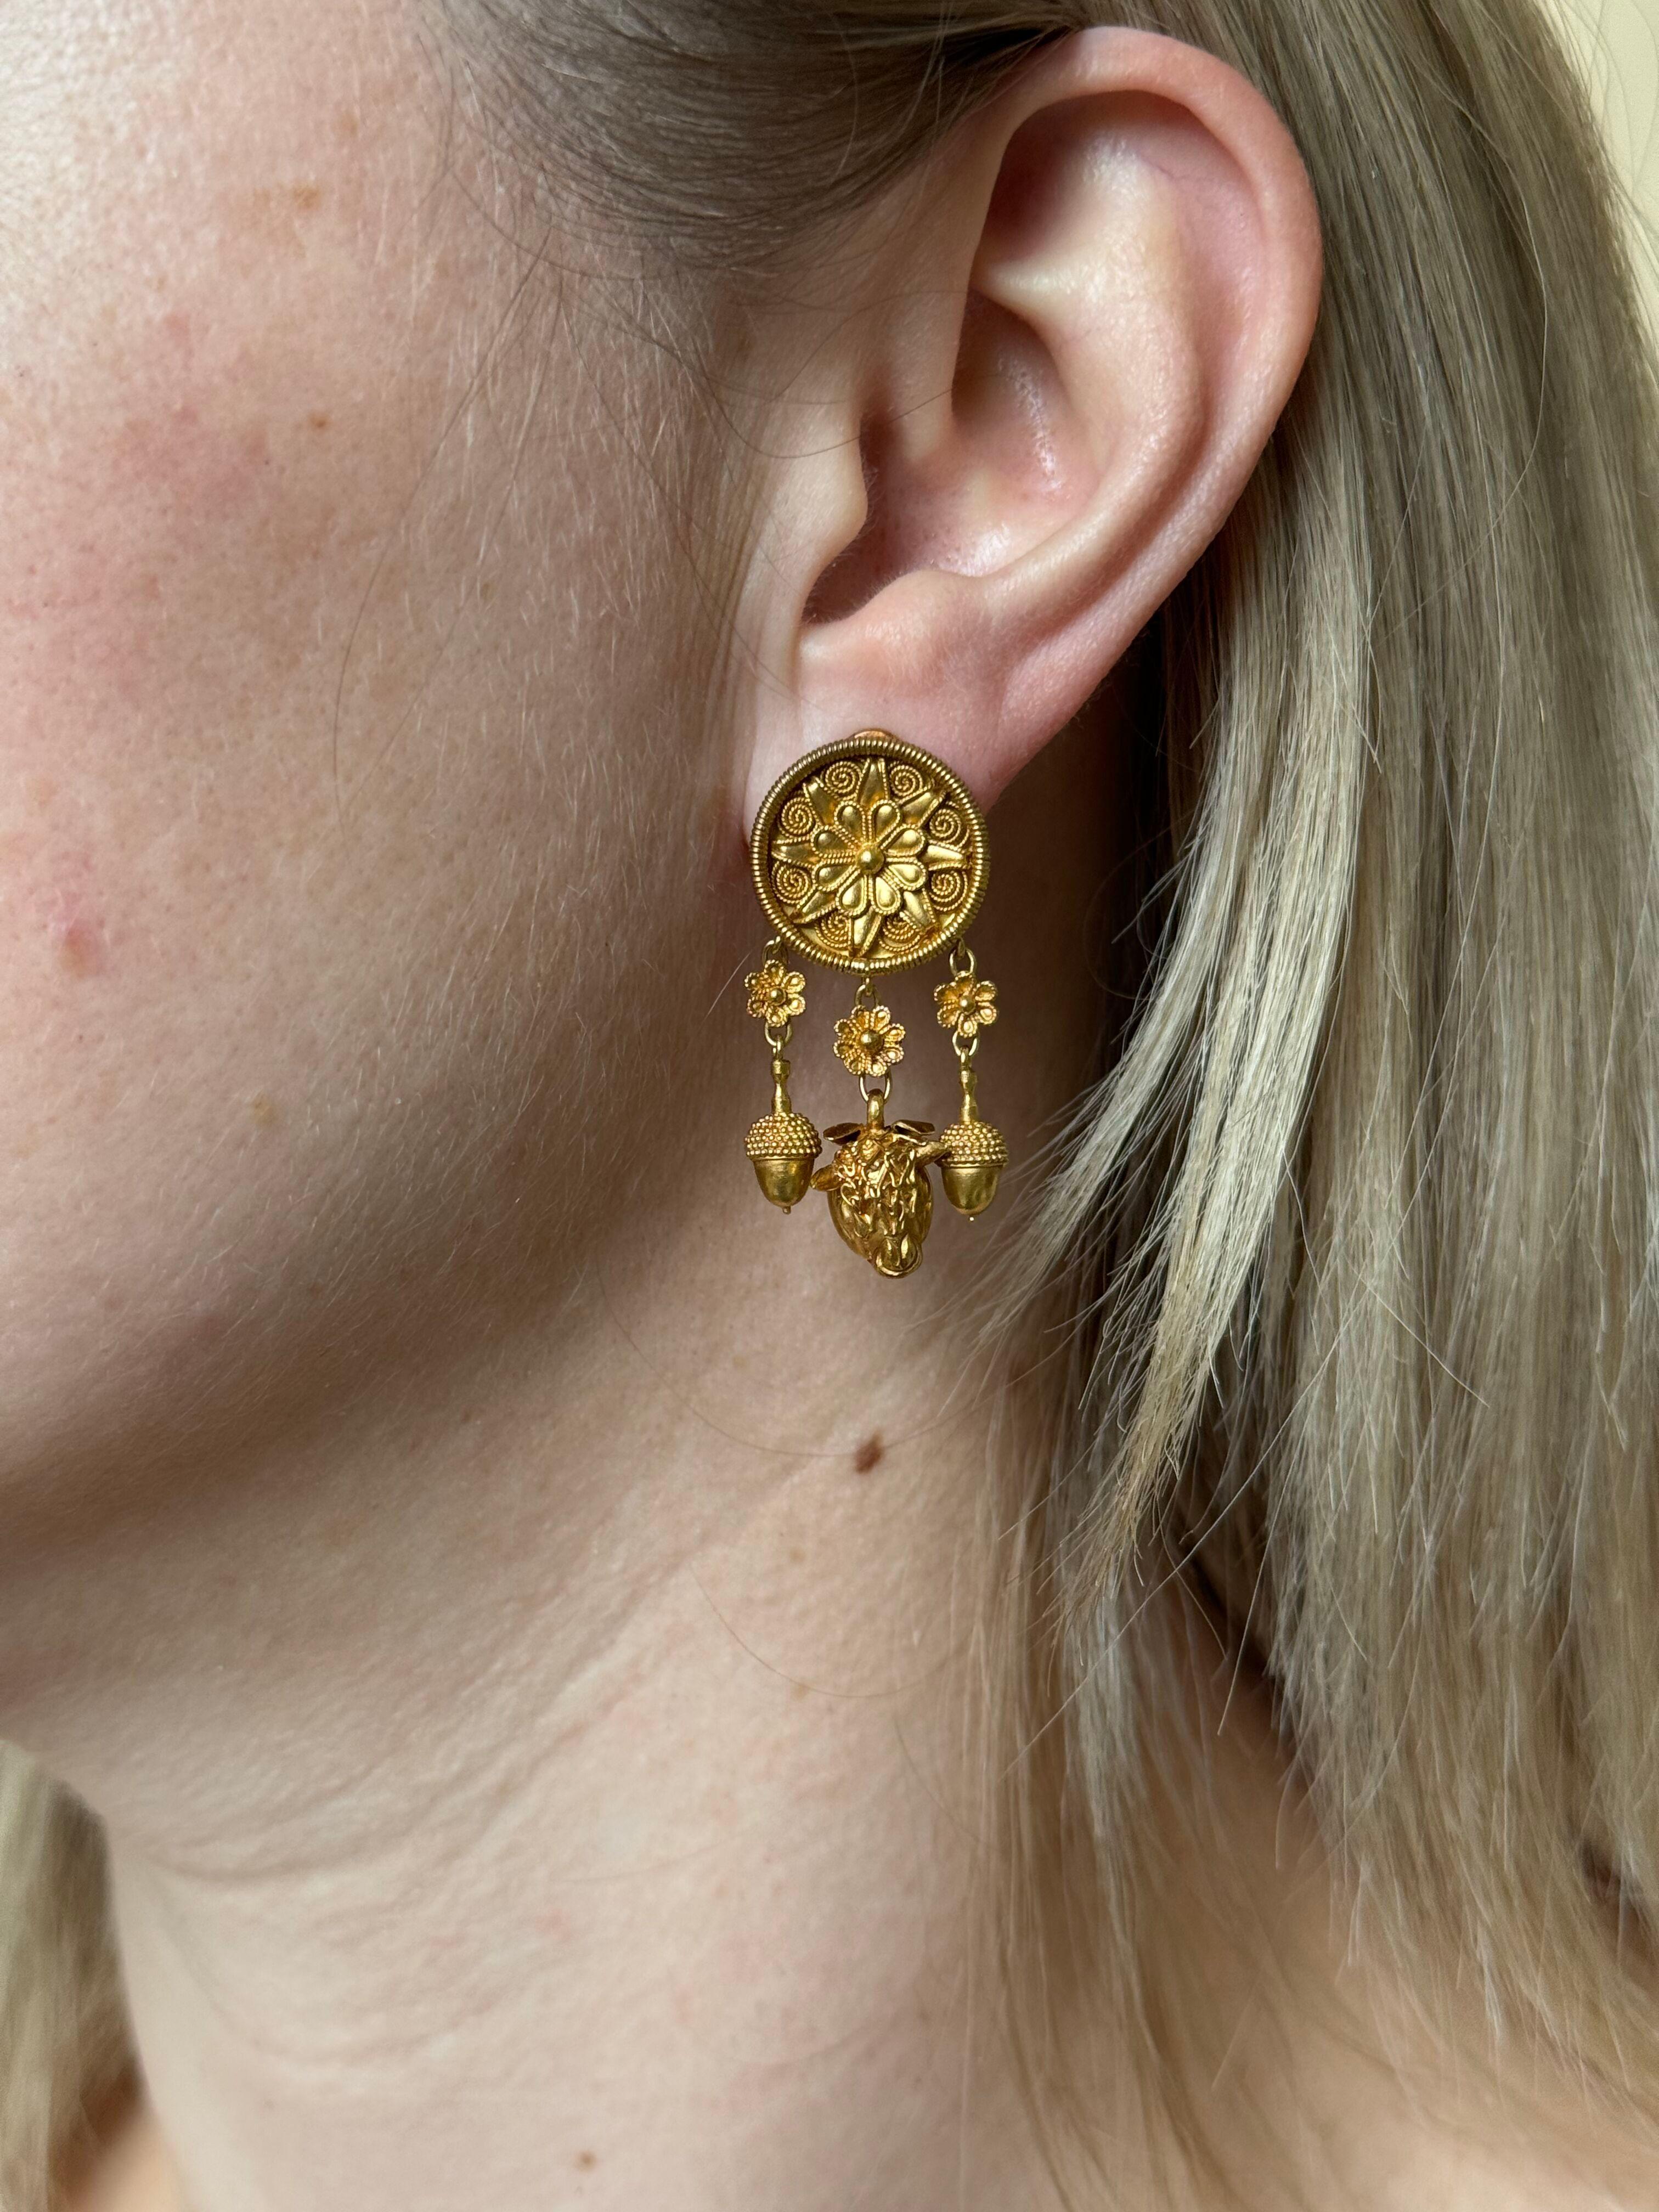 Pair of iconic 22k yellow gold earrings by Ilias Lalaounis of Greece, depicting acorn and bull. The earrings are 1 5/8